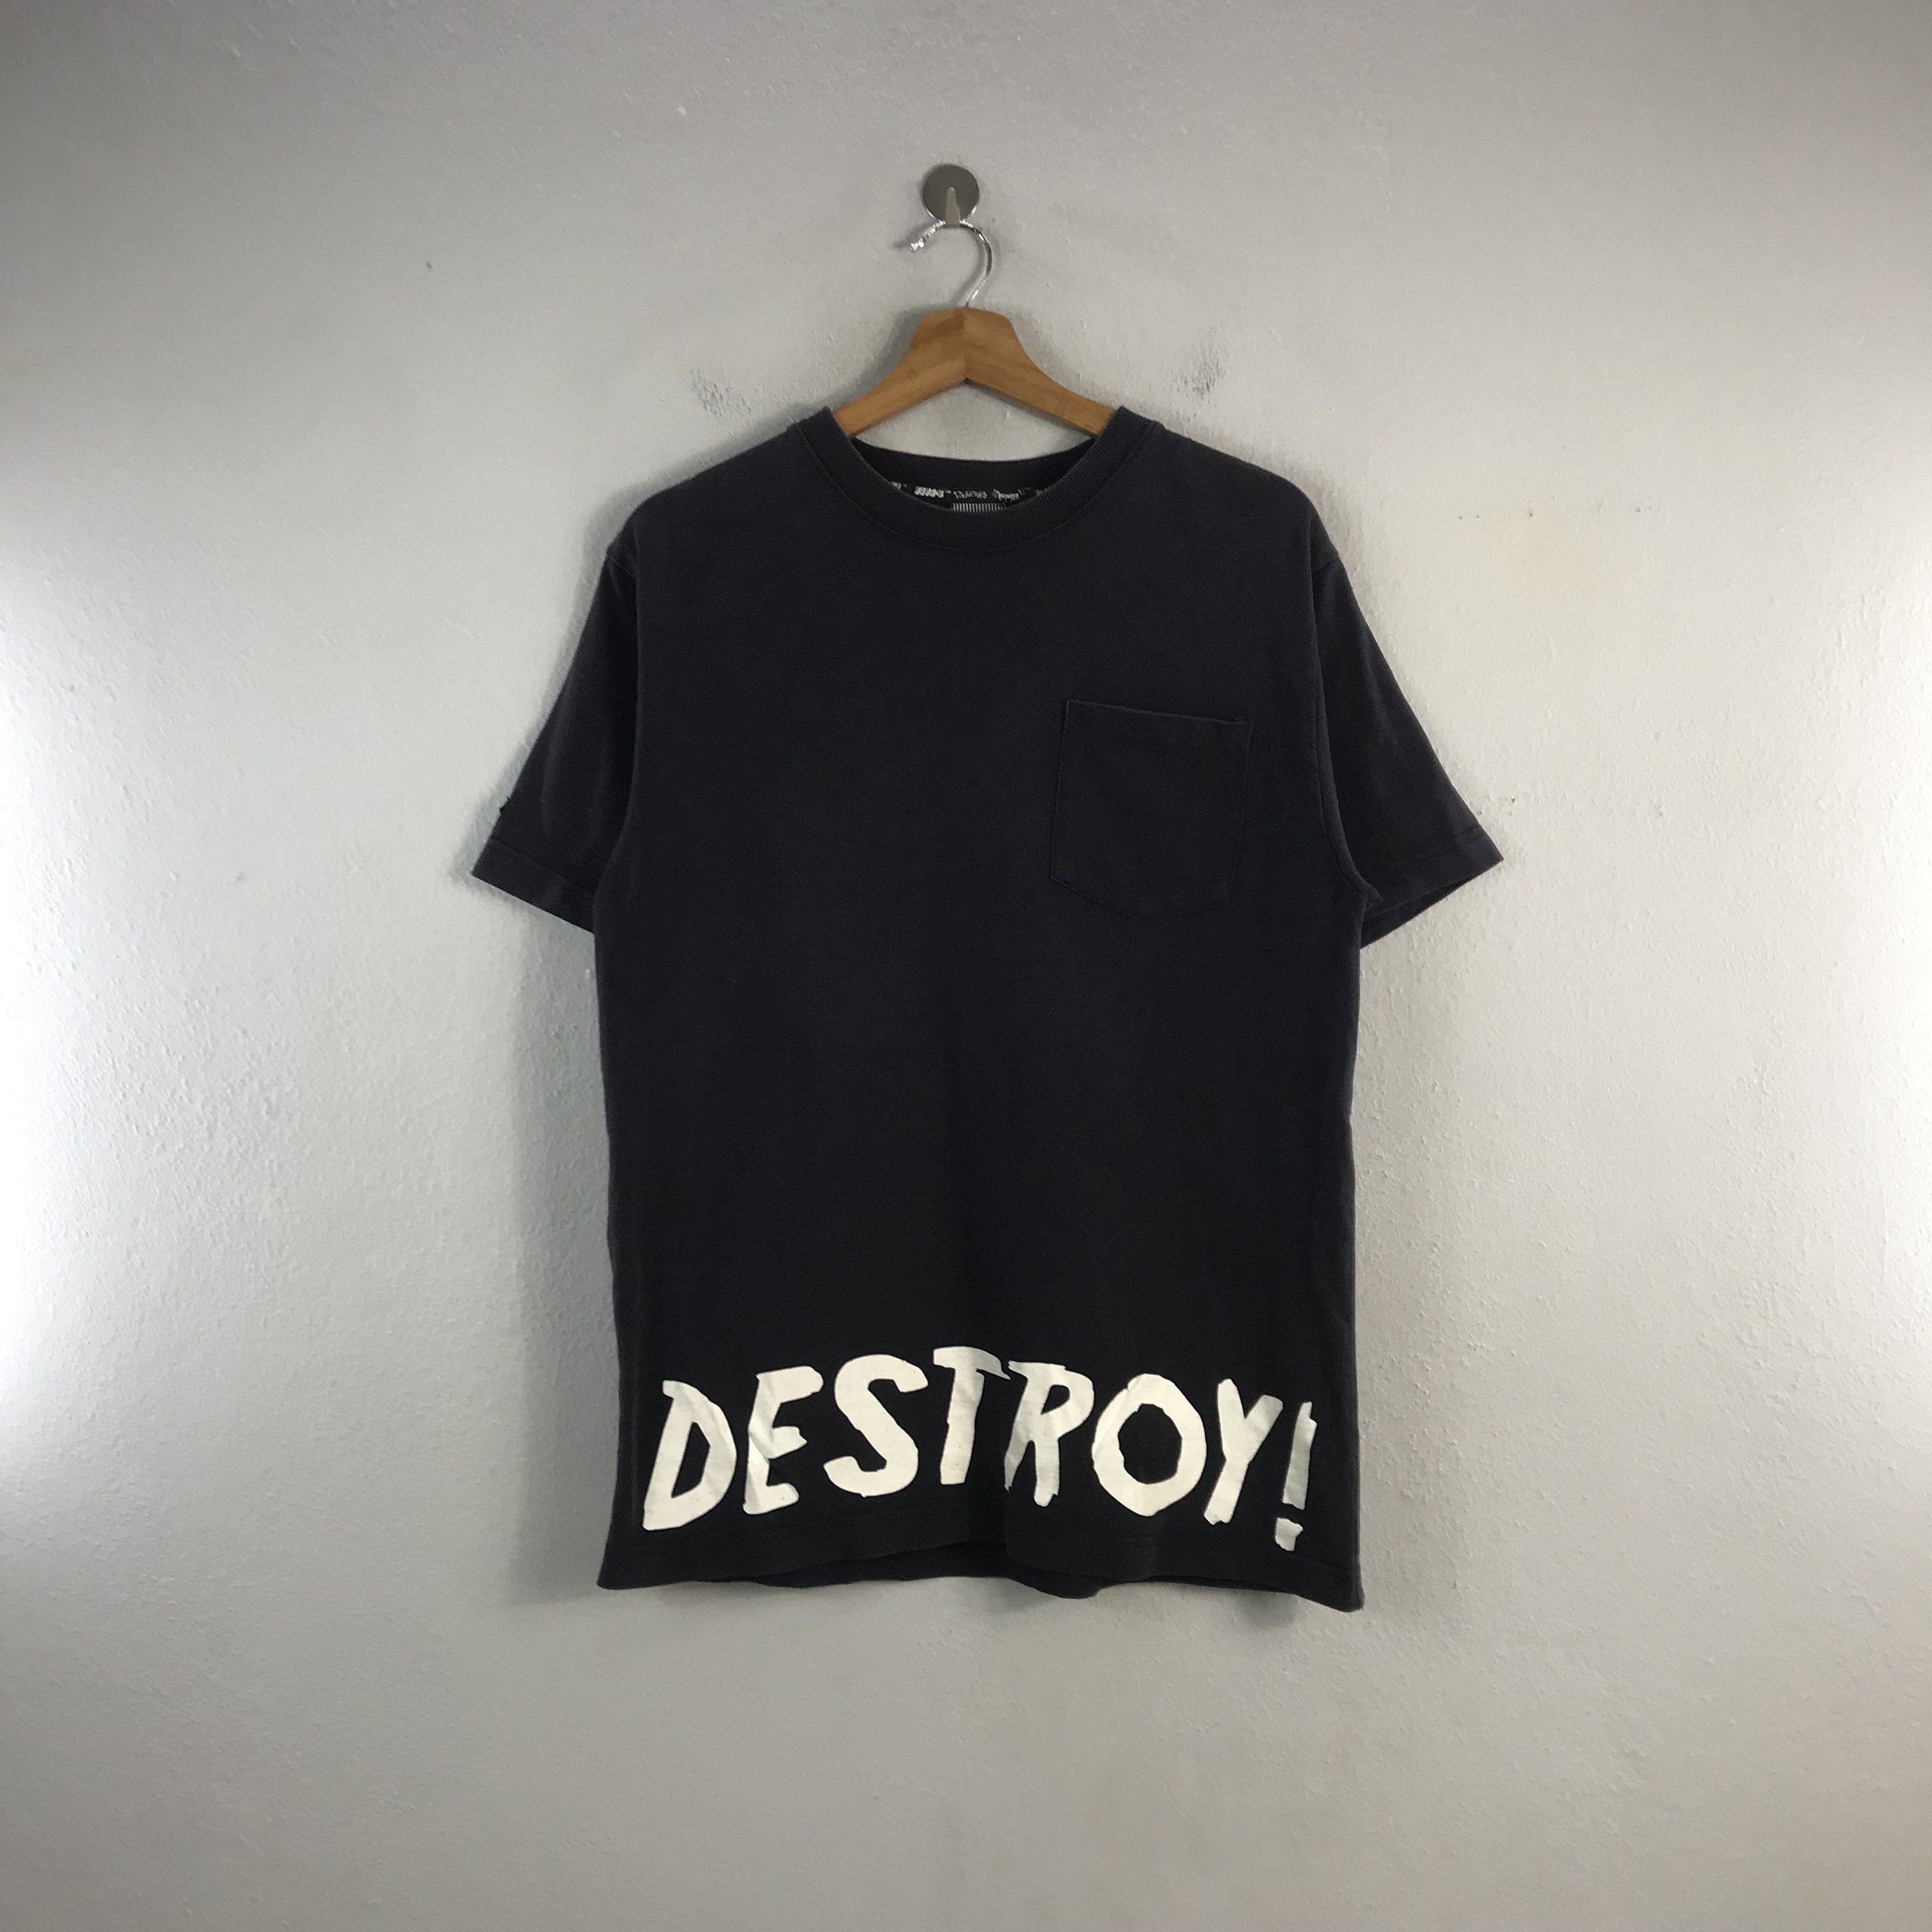 Duppies Five O Destroy Babyblon Style Design Wording Japanese Brand  Streetwear Vintage Casual Outfits Fashion Top tees tshirt Black Large